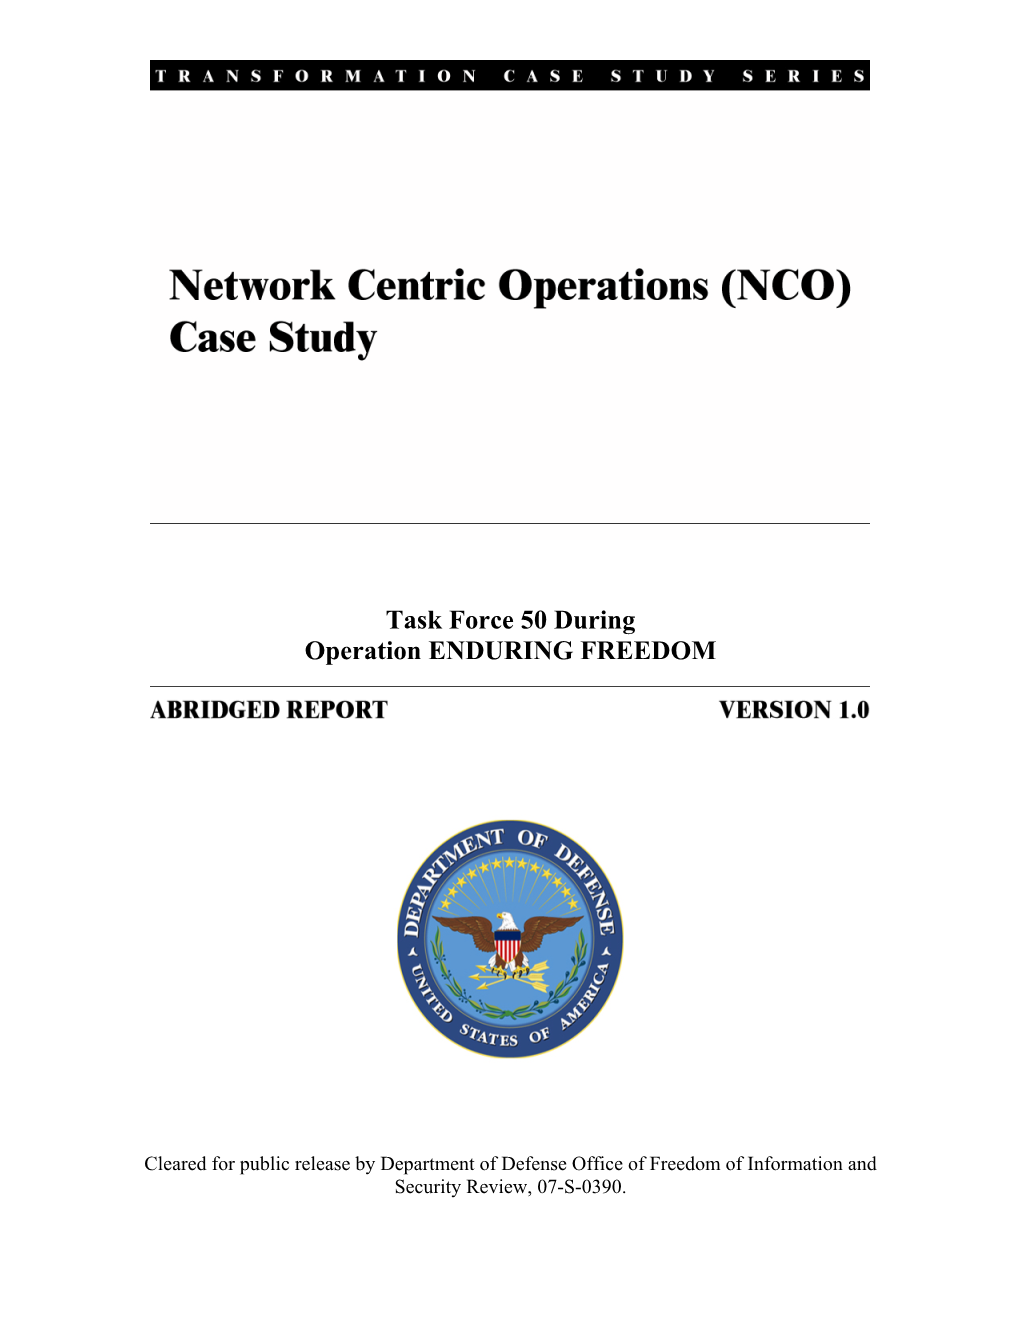 Network Centric Operations Case Study: “Network Centric Warfare in the U.S